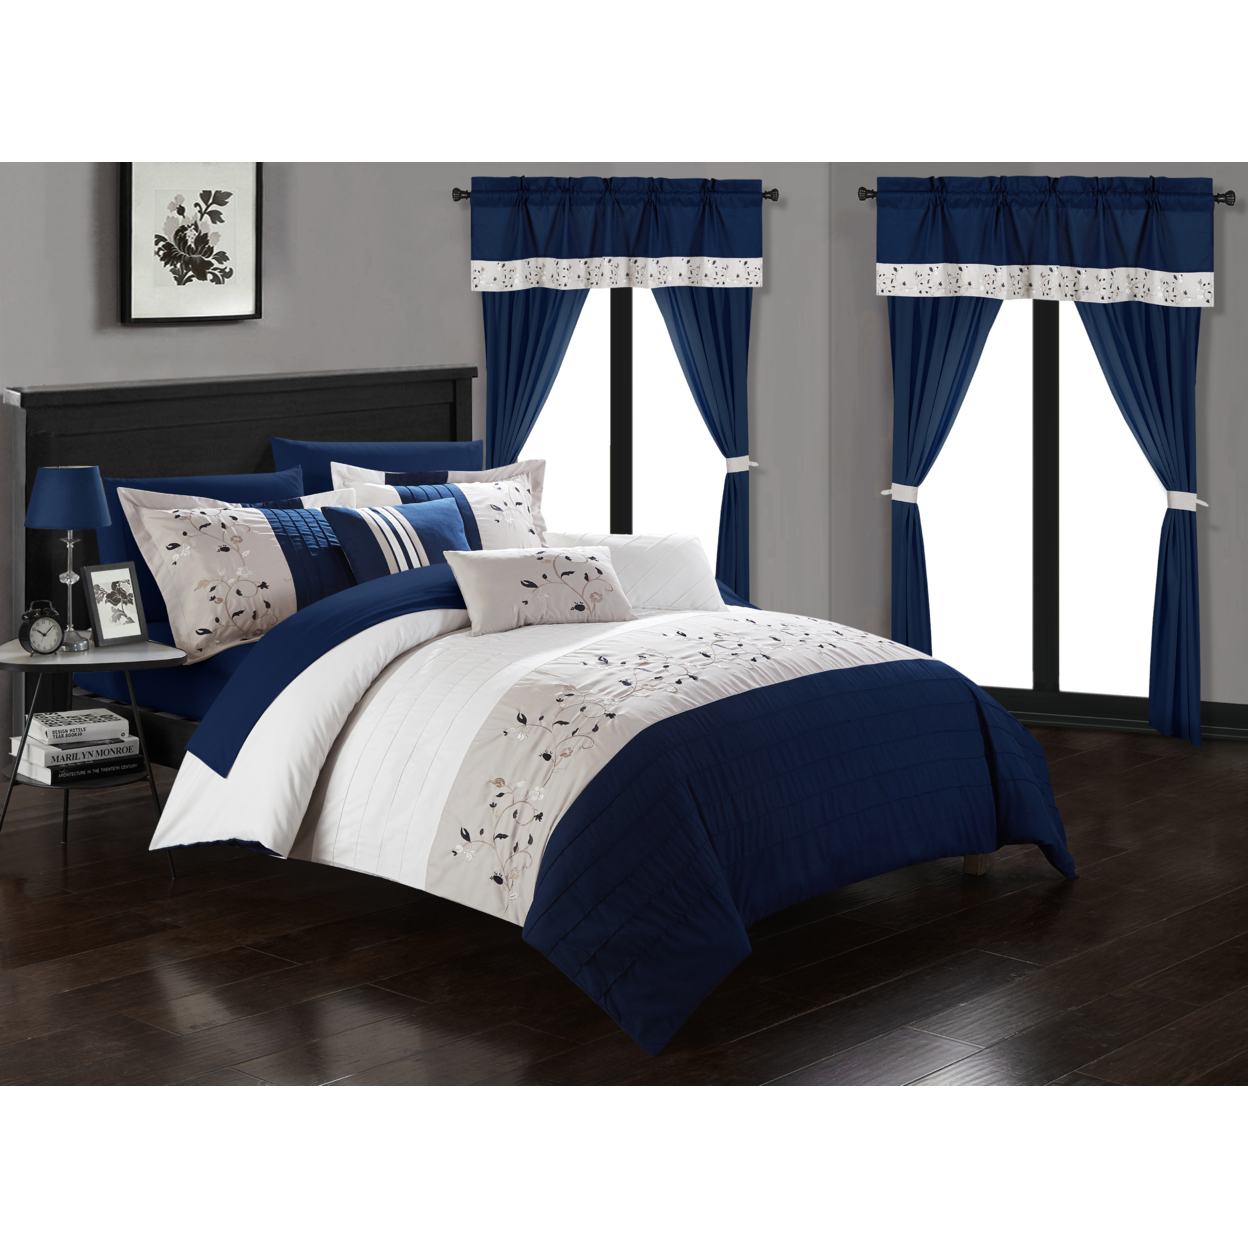 Sonita 20-Piece Bedding Set With Comforter, Sheets & Curtains, Mult. Colors - Navy, King